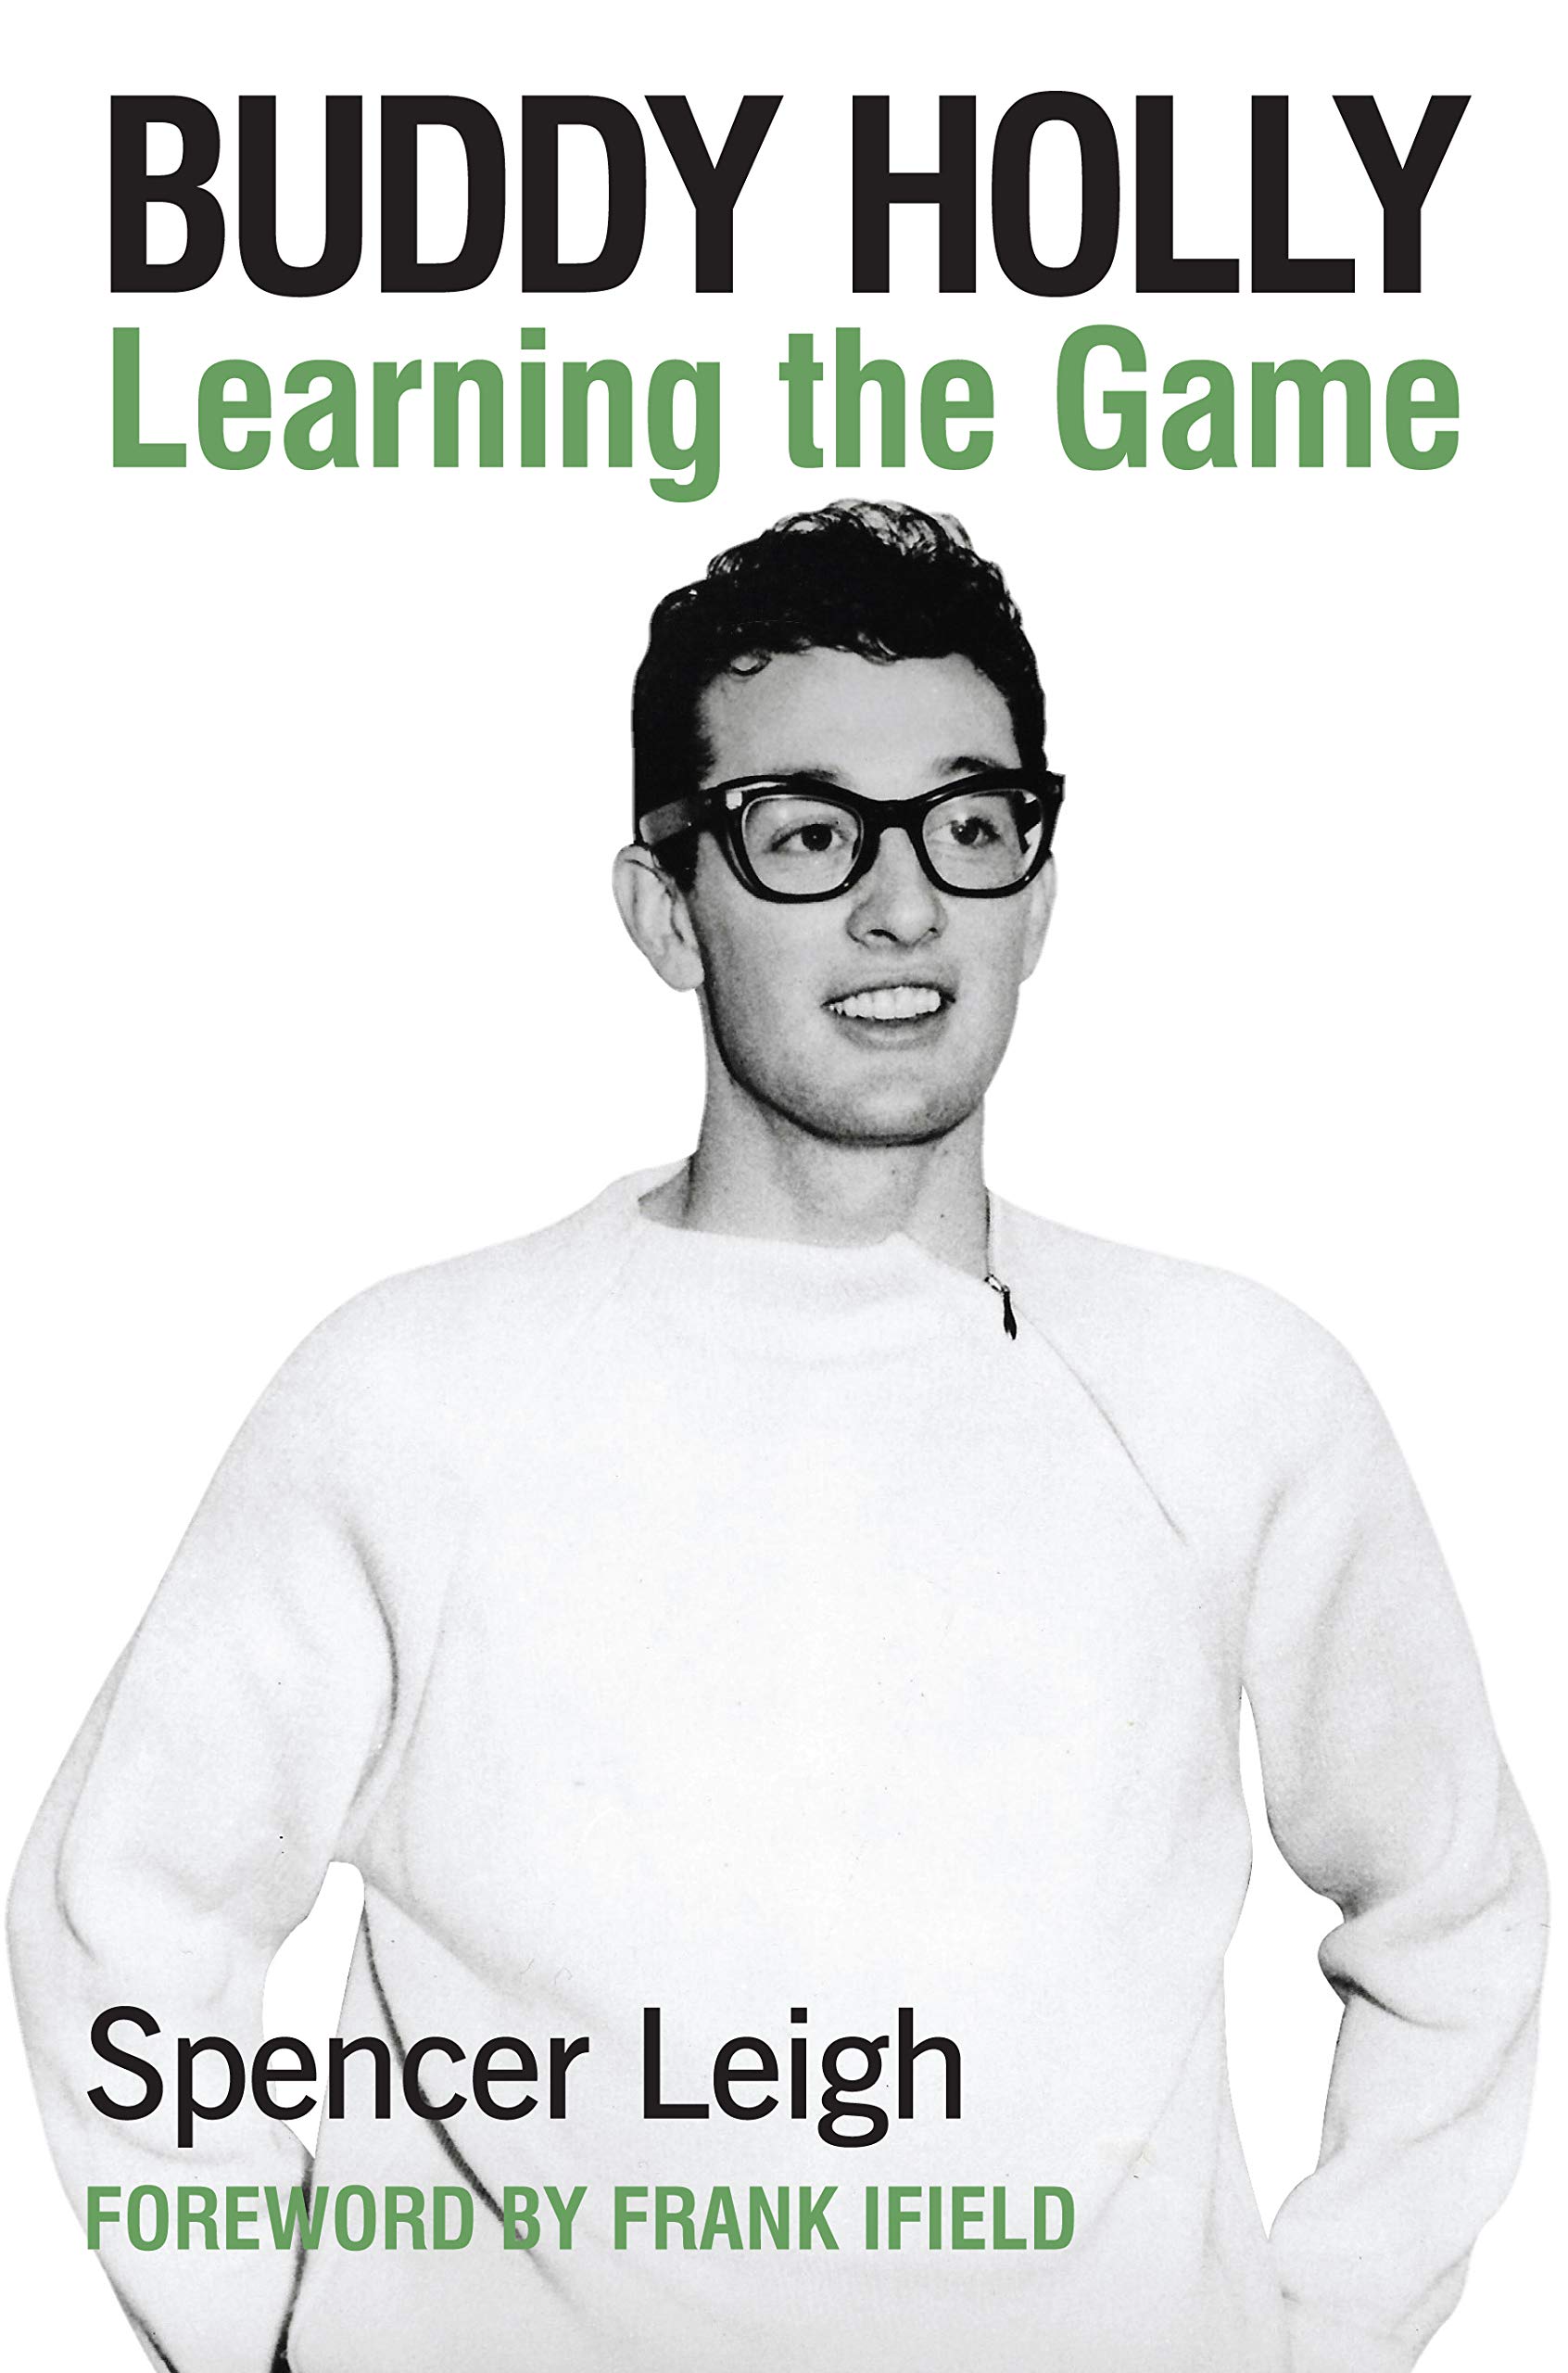 Buddy Holly Learning the Game.jpg